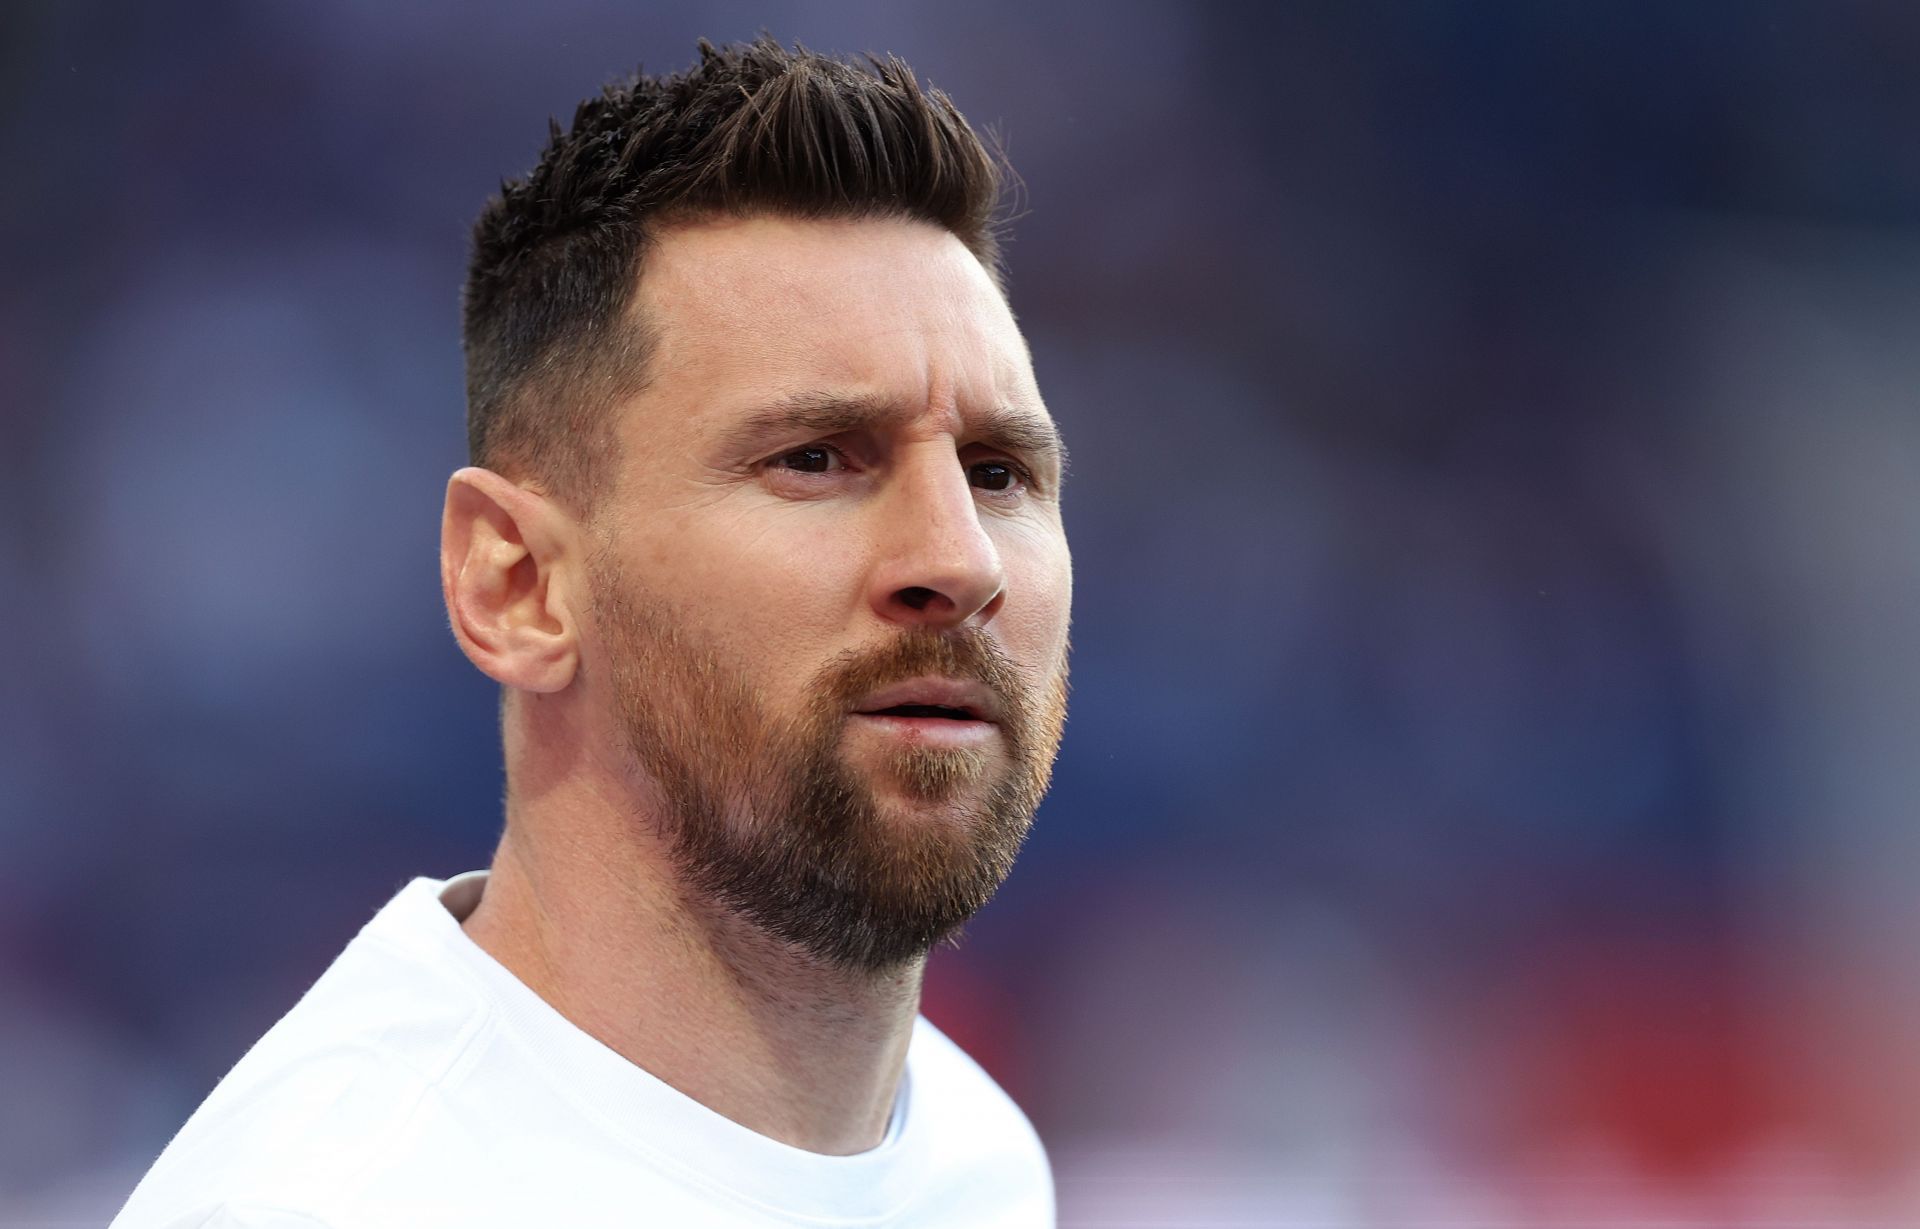 Lionel Messi will play in the MLS next season.